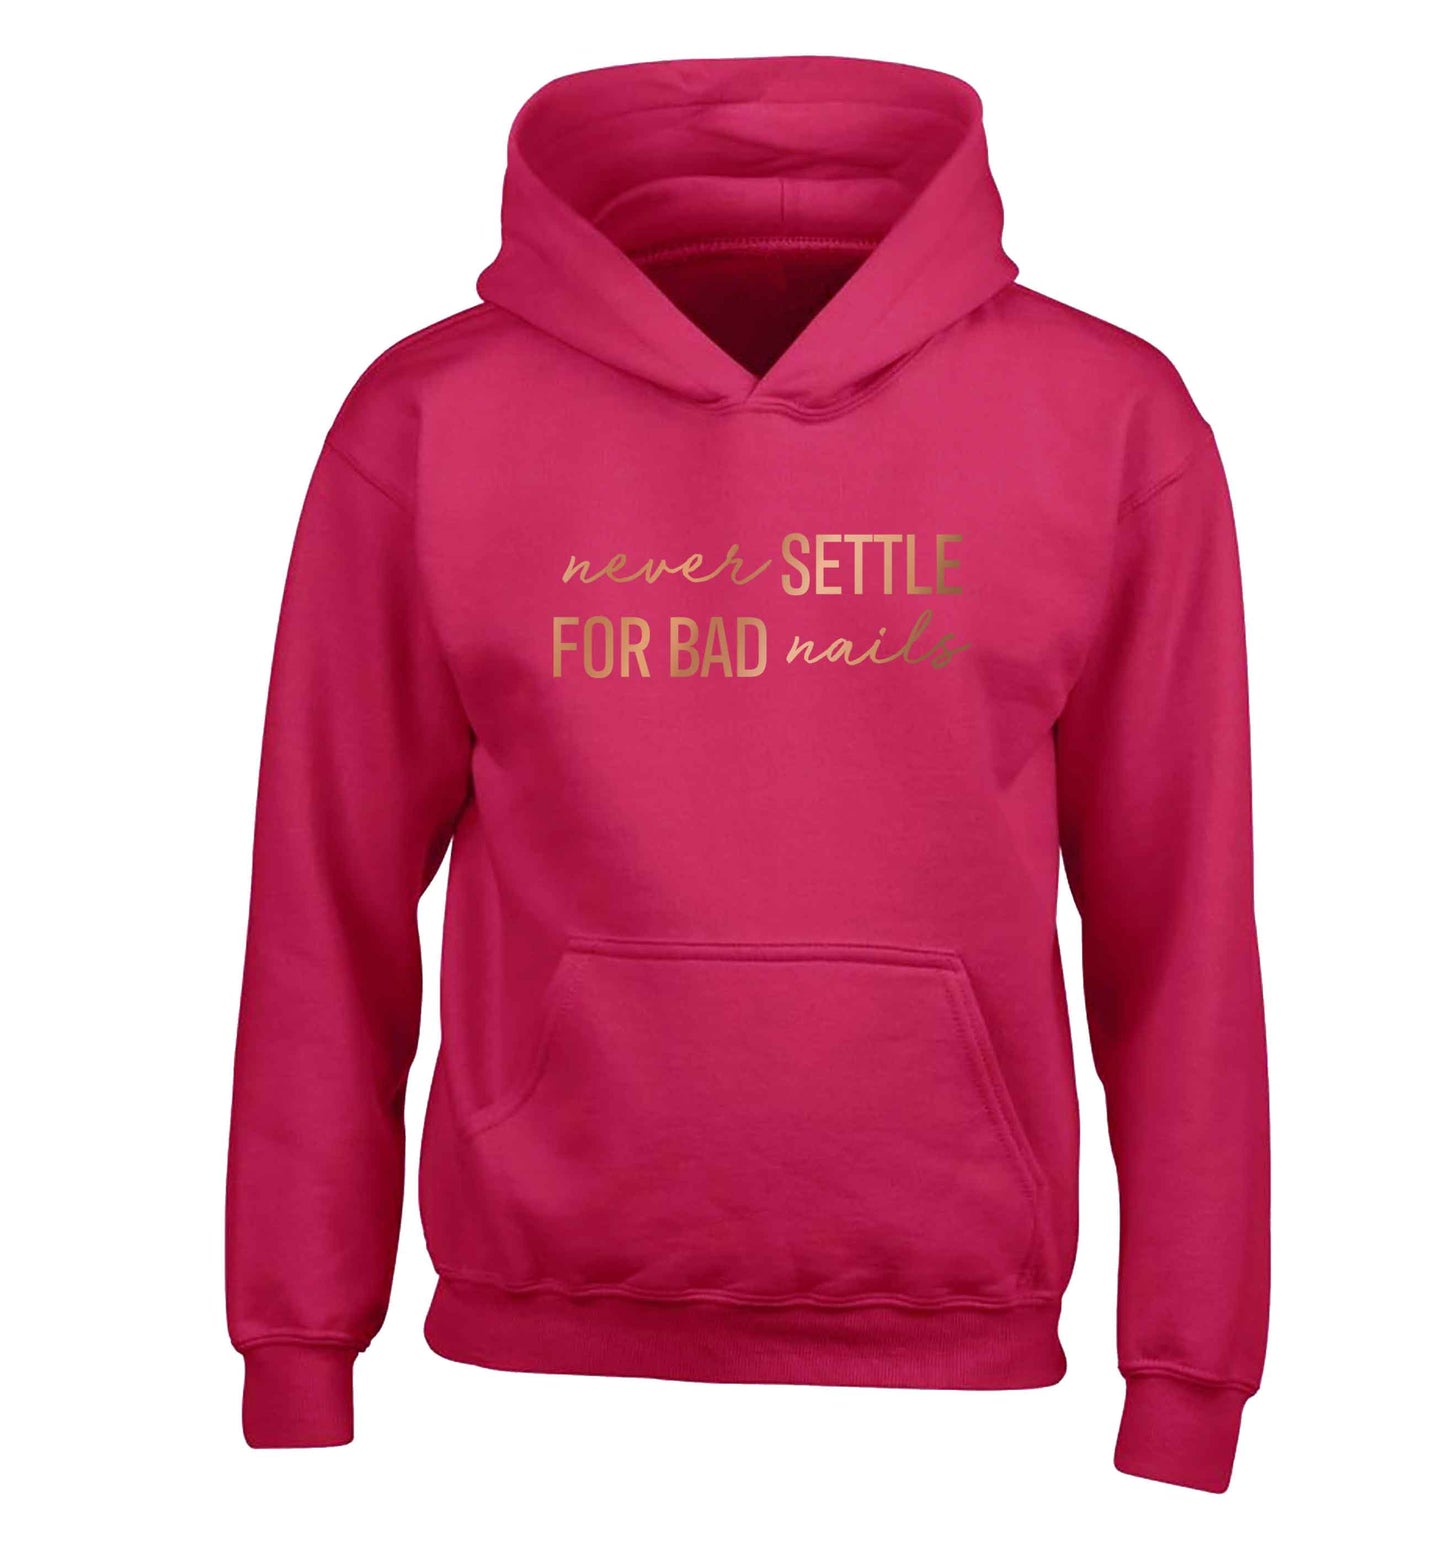 Never settle for bad nails - rose gold children's pink hoodie 12-13 Years